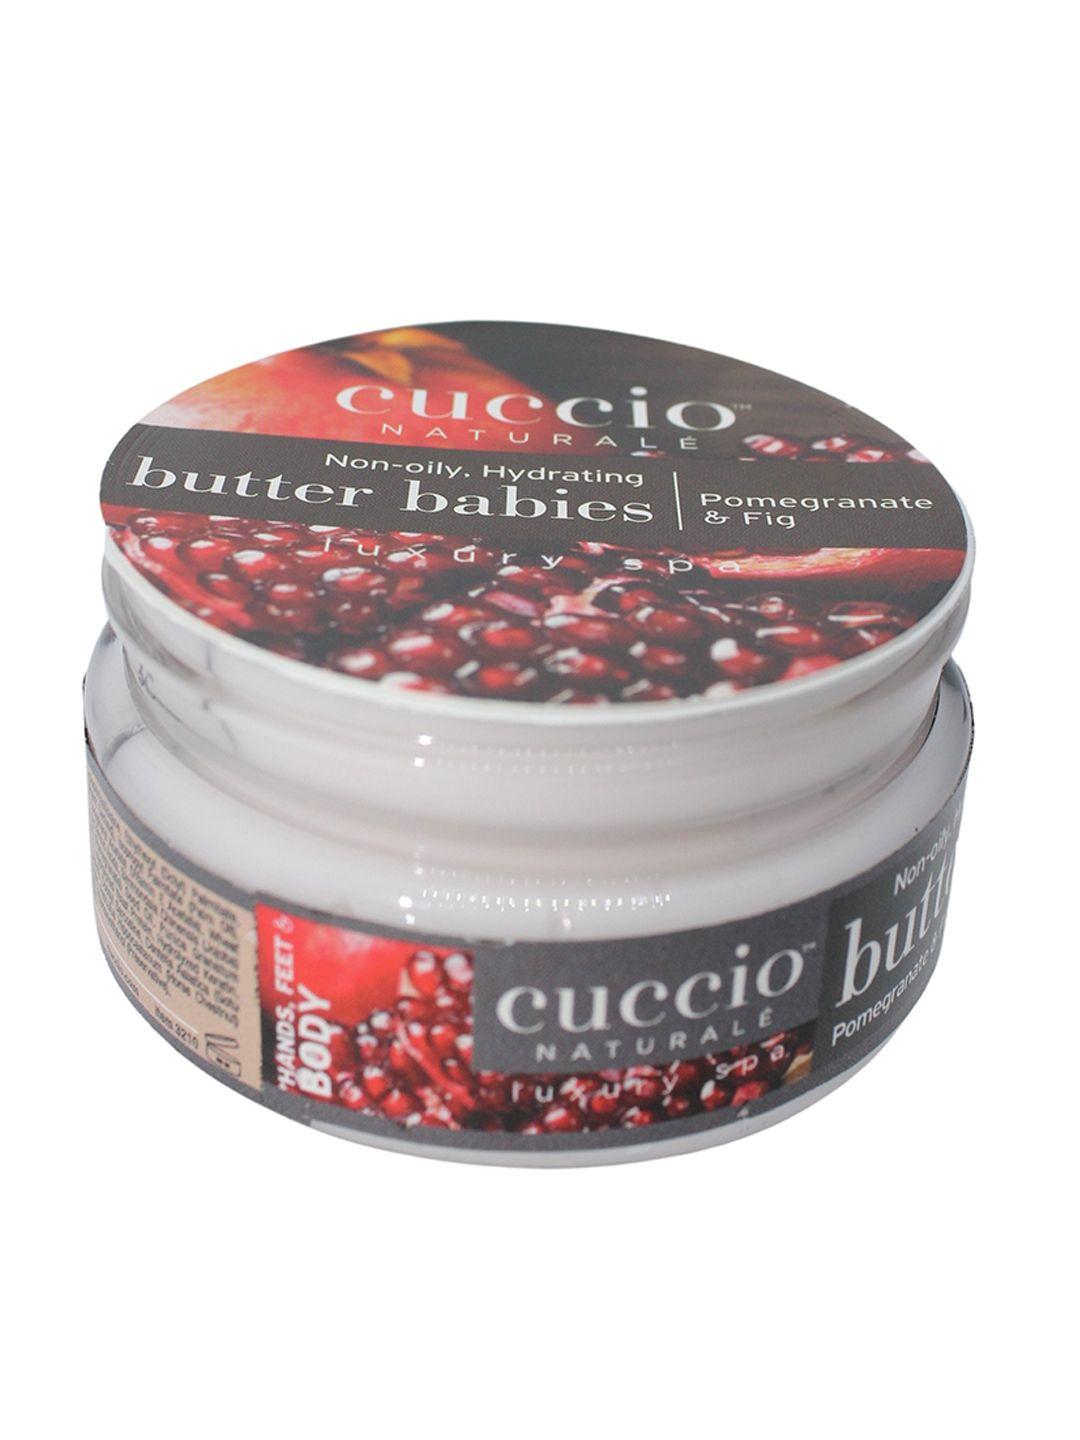 cuccio naturale red butter body lotion with pomegranate & fig - 42 gms